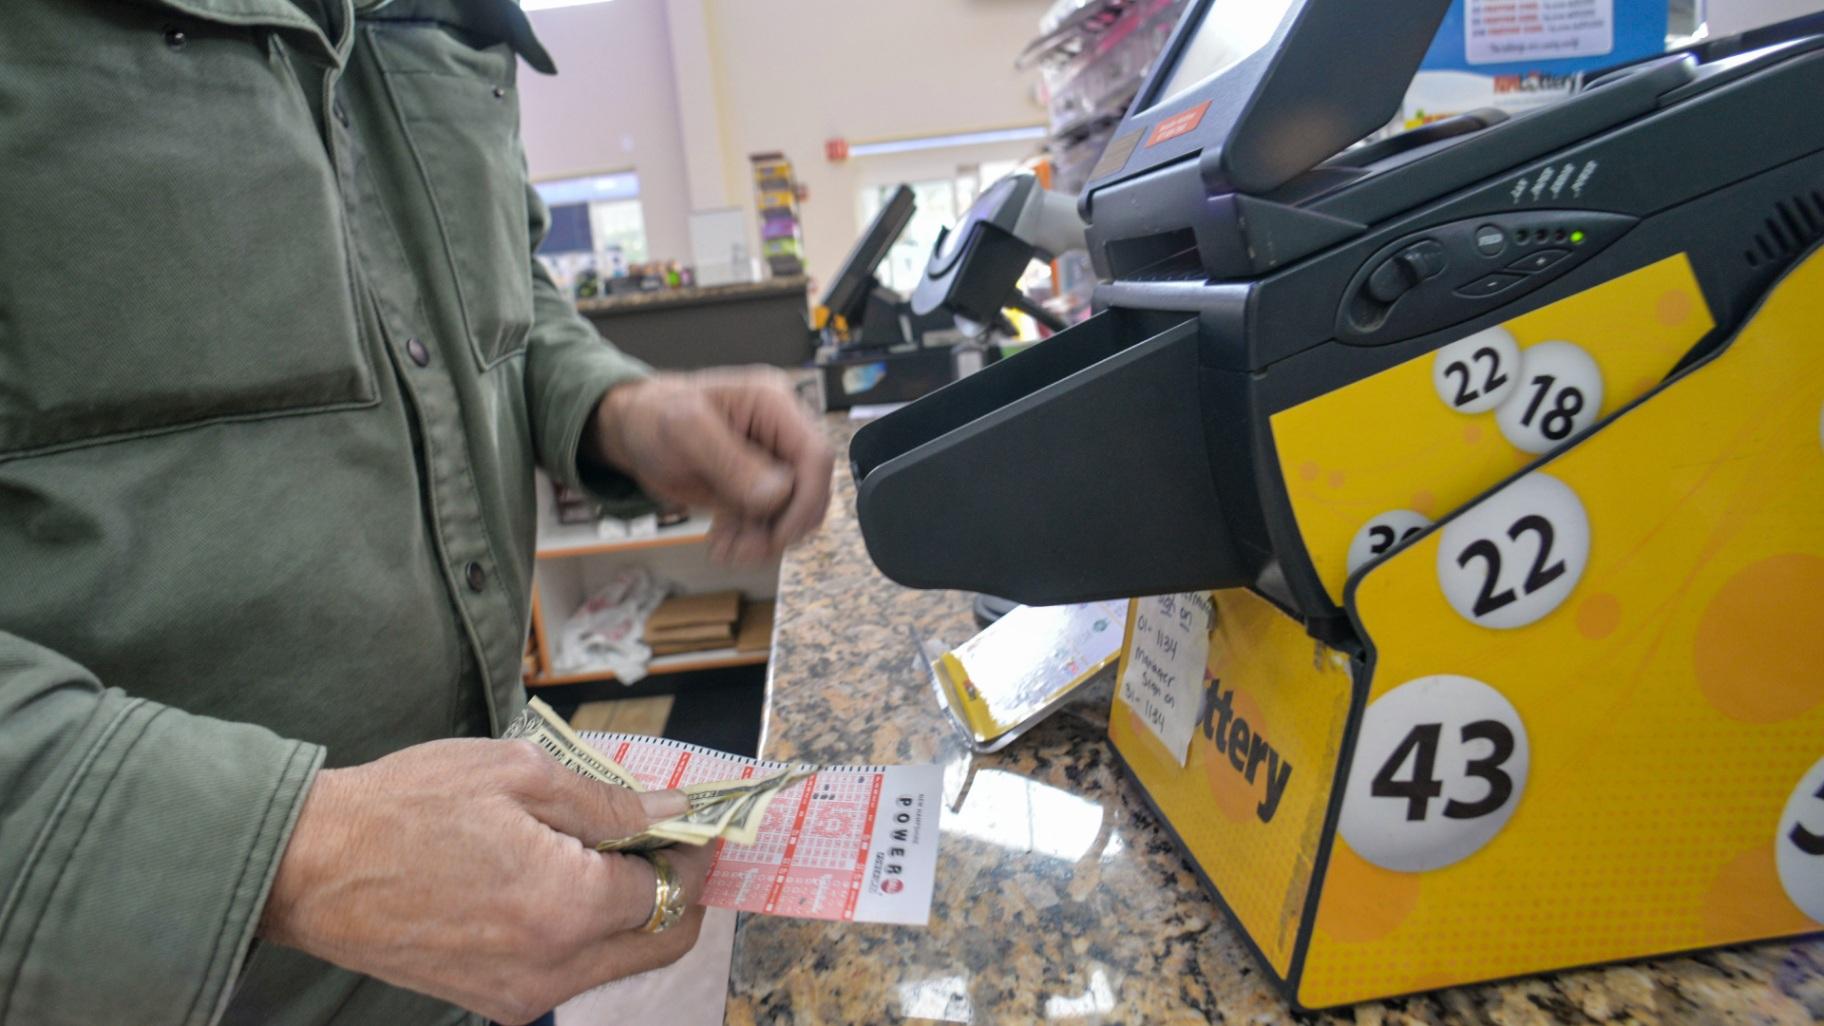 Bruce Gideos, floor manager at Pierre’s Place, in Chesterfield, N.H., prints out Powerball tickets on Thursday, Nov. 3, 2022. (Kristopher Radder / The Brattleboro Reformer via AP)